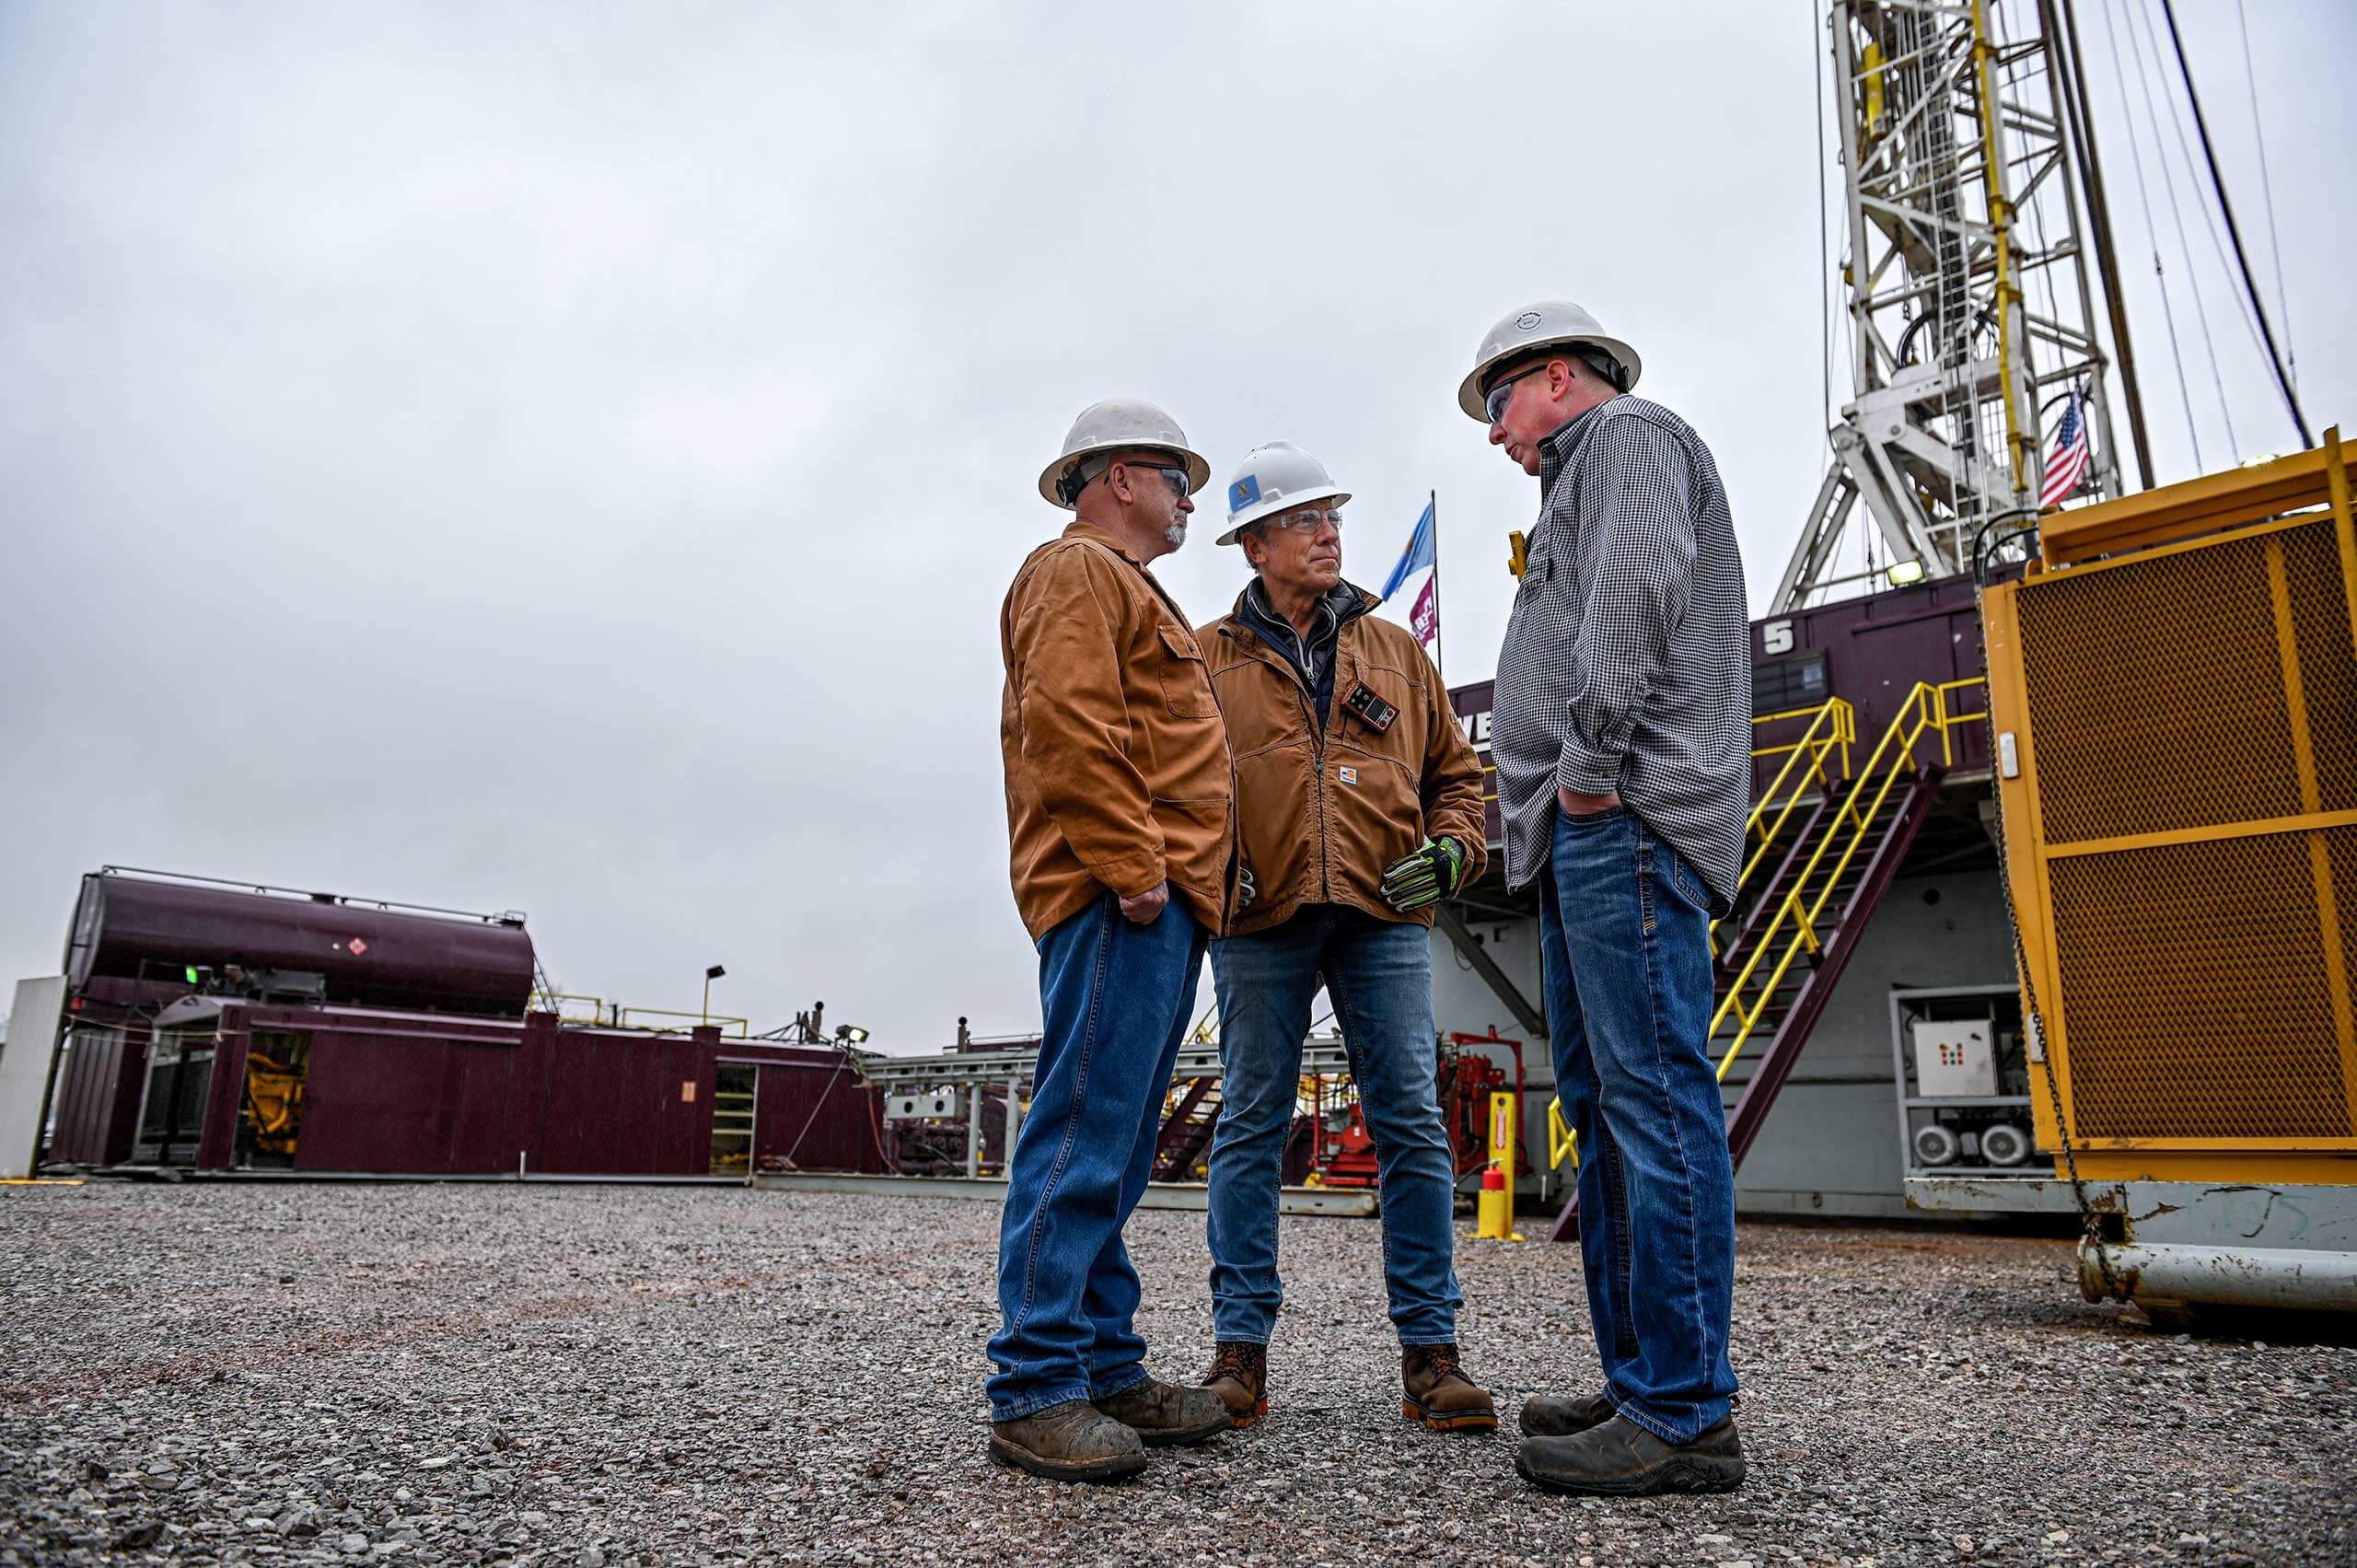 Mike Rowe gets to know the people of Oklahoma Oil & Natural Gas.